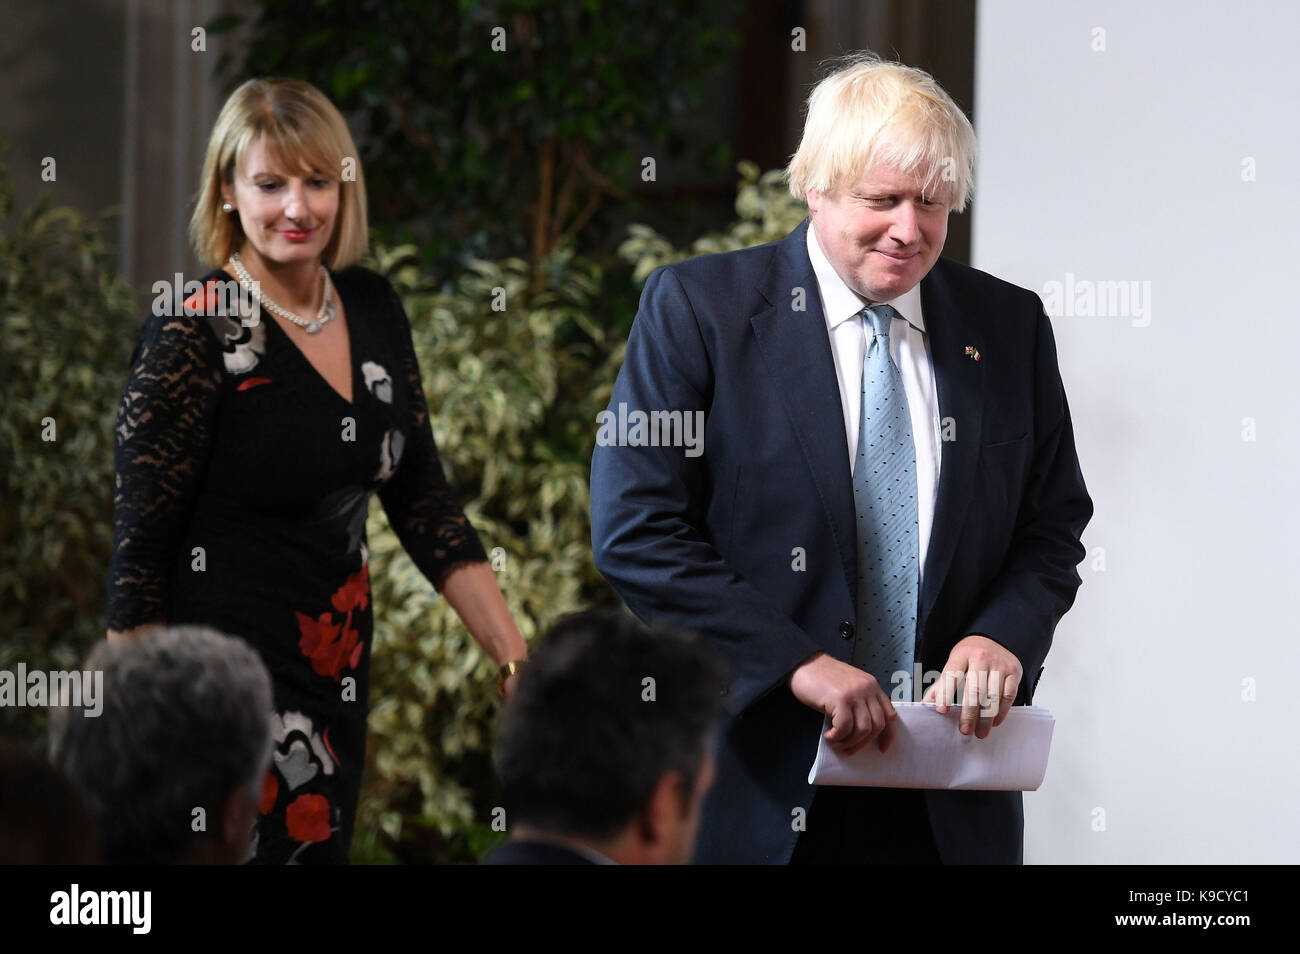 Foreign Secretary Boris Johnson arrives ahead of a speech by Prime Minister Theresa May in Florence, Italy, where she set out her plans for a transitional period from the formal date of Brexit in March 2019, expected to last two years, before moving to a permanent trade deal. Stock Photo